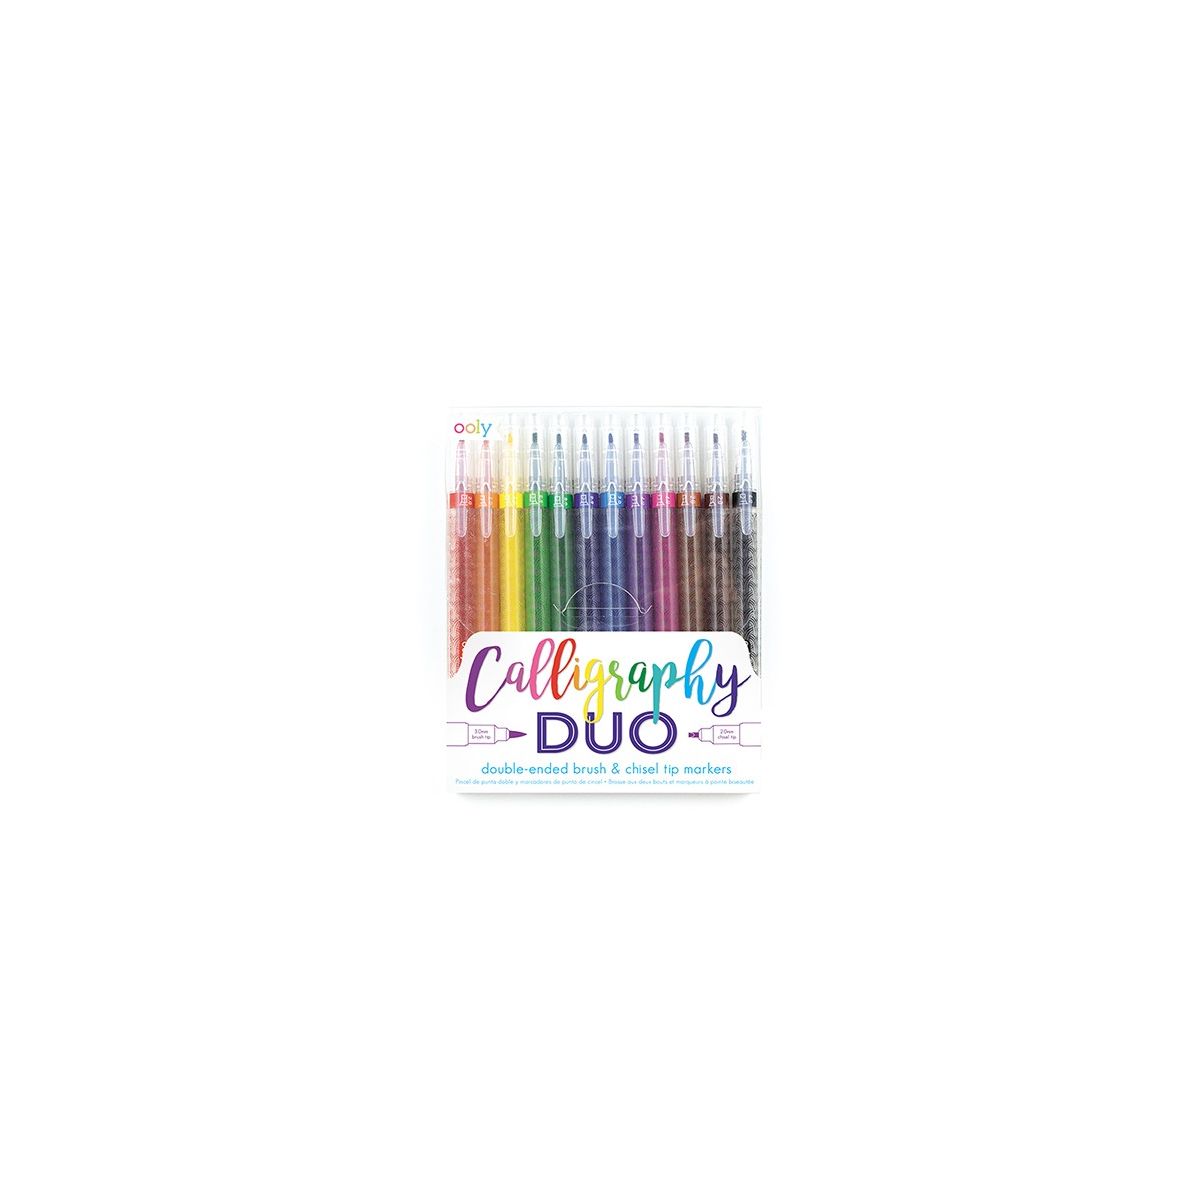 https://blaubloom.com/21529-thickbox_default/calligraphy-duo-chisel-and-brush-tip-markers-12u.jpg